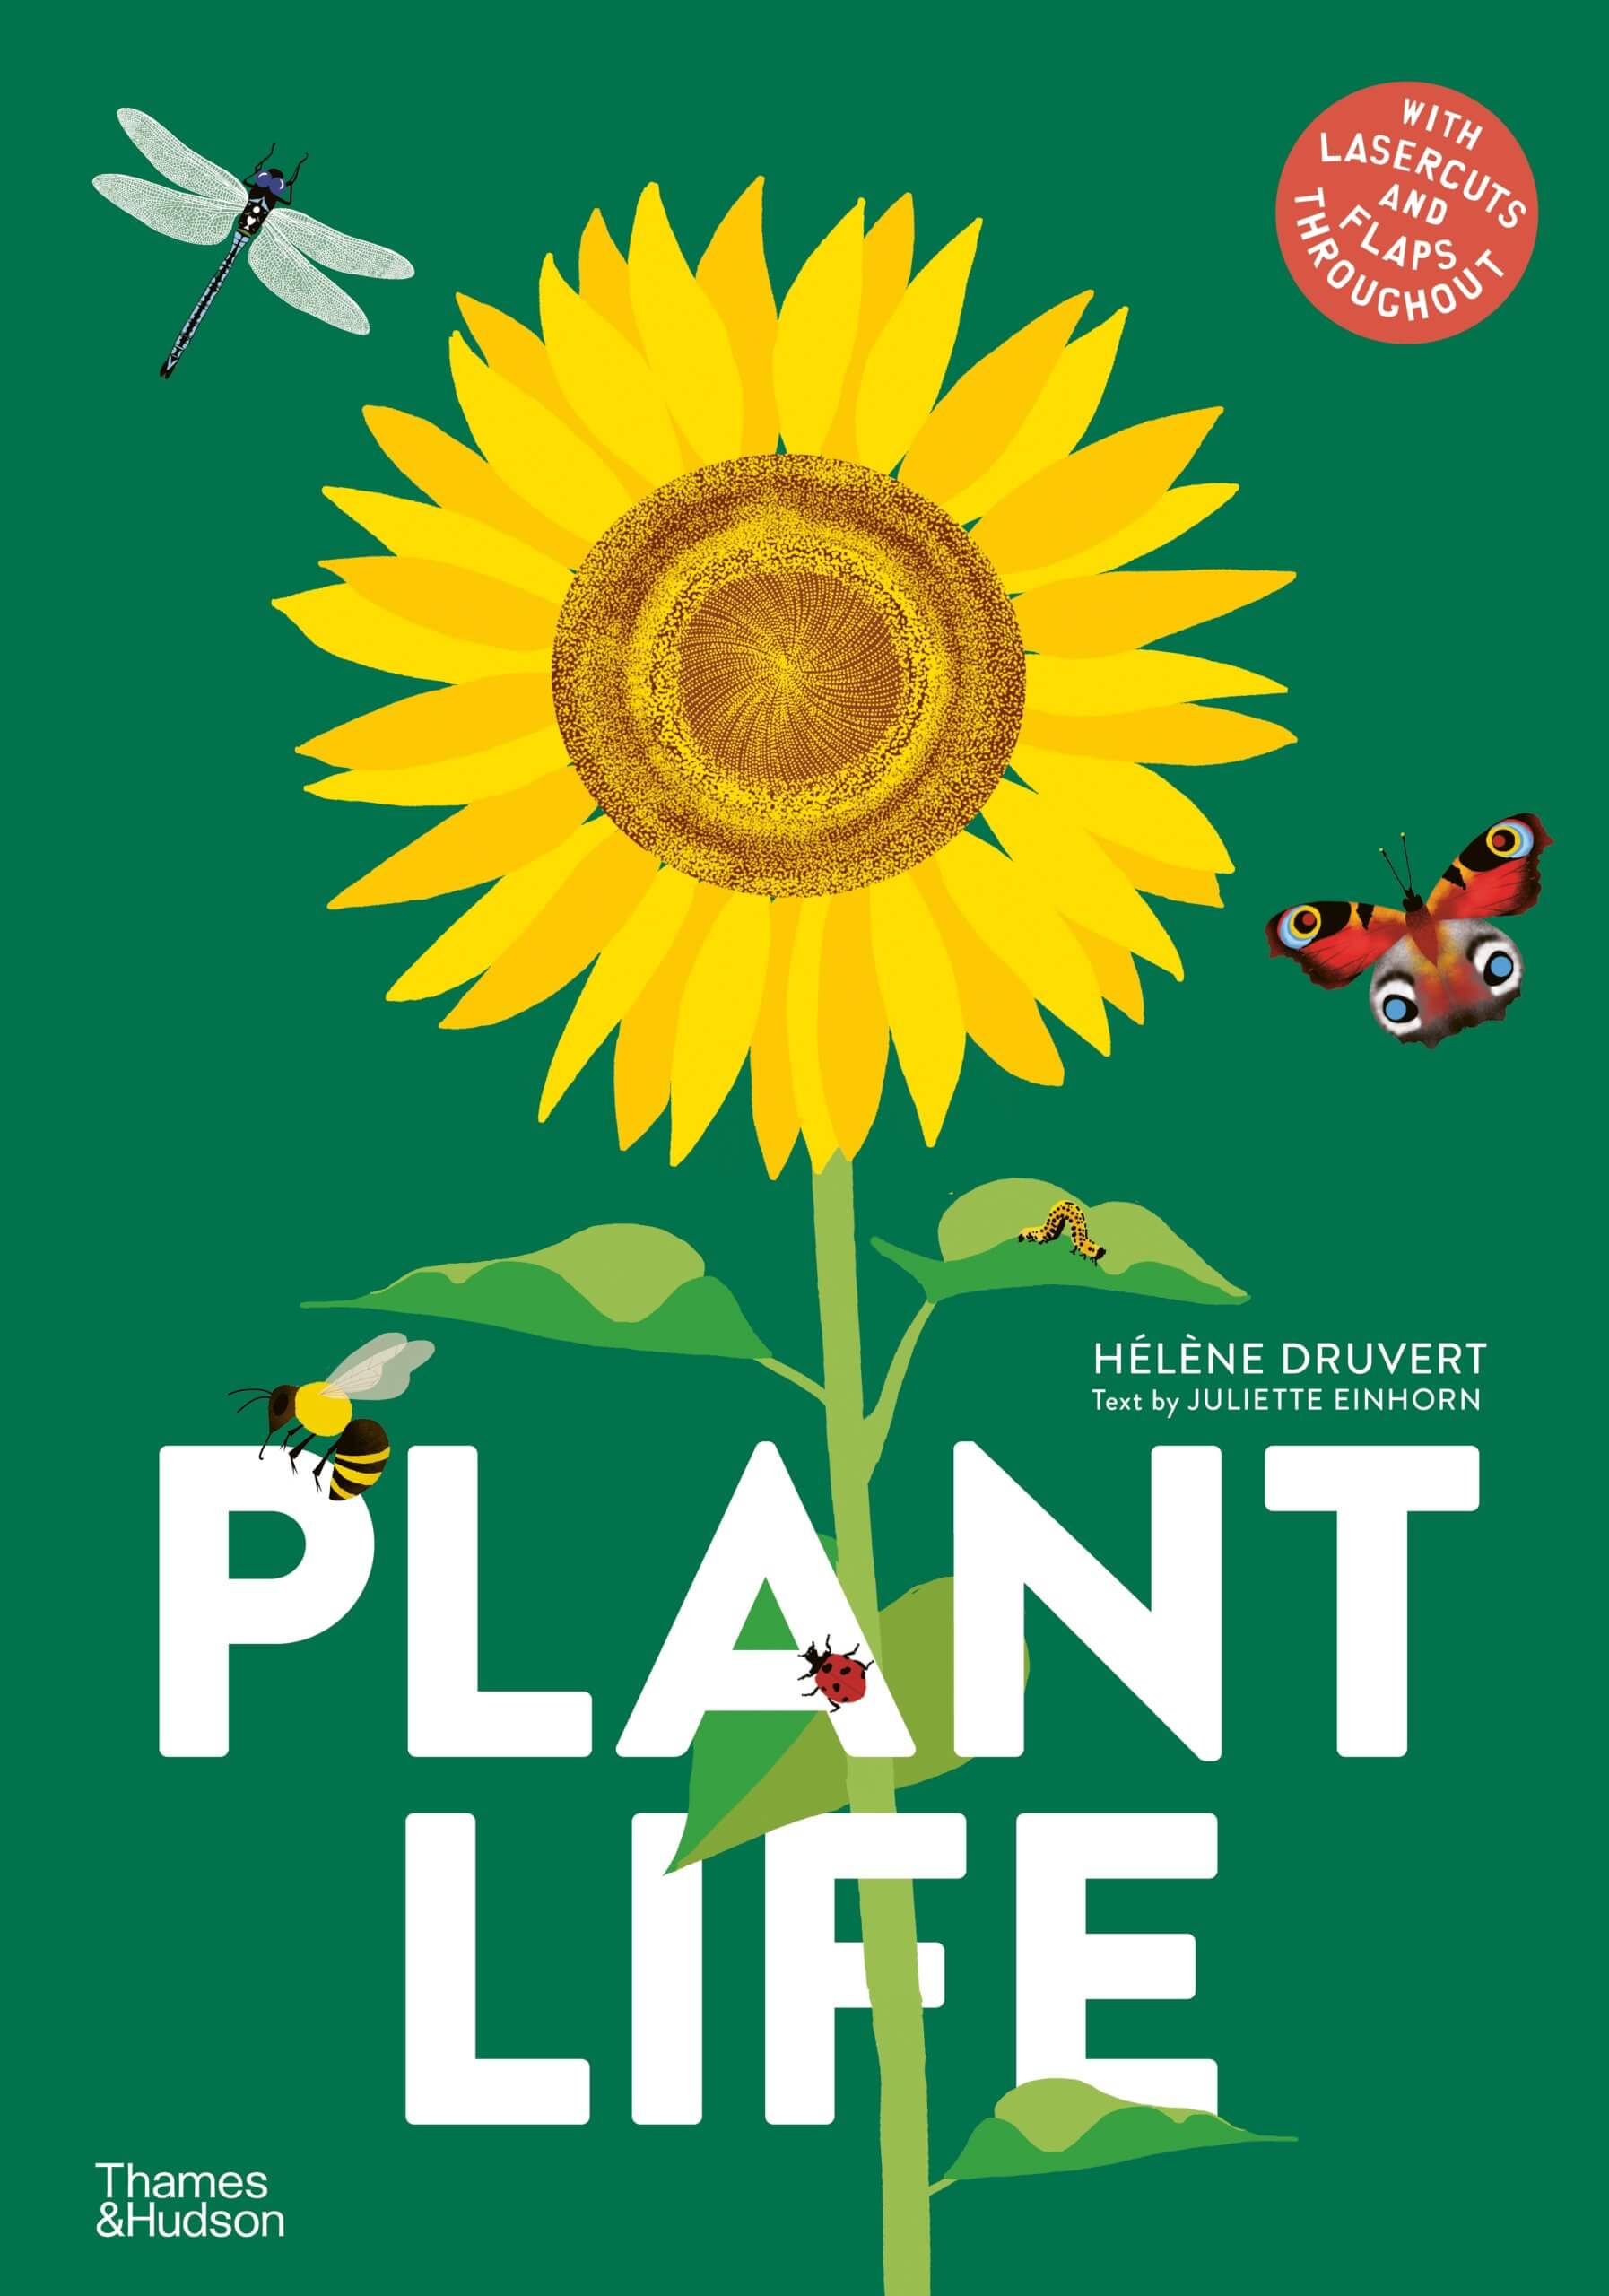 Book cover featuring illustrated sunflower on green background. Title printed in large, white, sans serif font